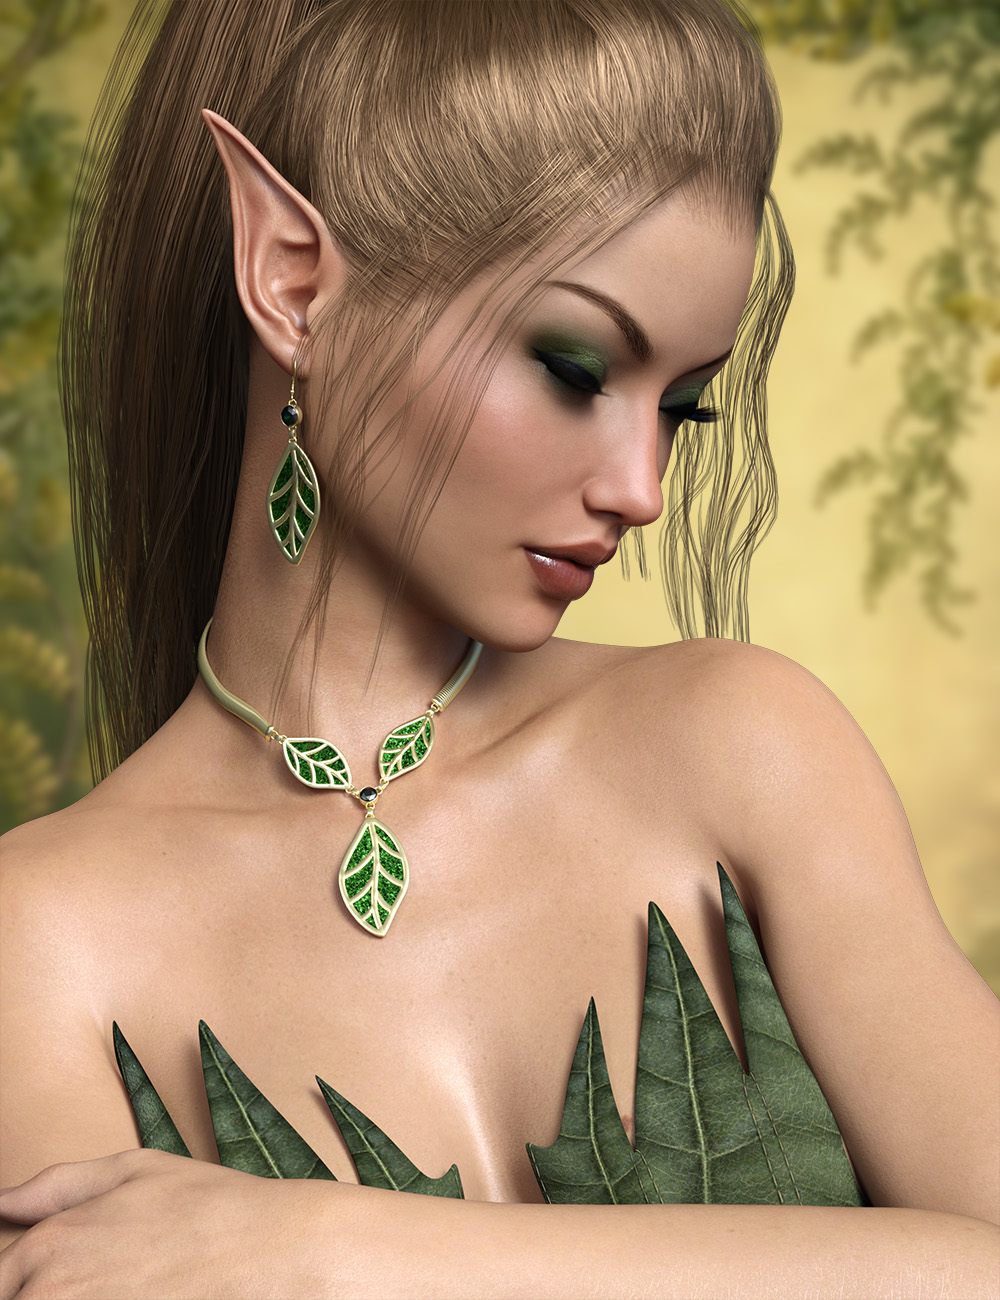 FWSA Vanessa HD for Victoria 7 and her Jewelry by: Fred Winkler ArtSabbyFisty & Darc, 3D Models by Daz 3D